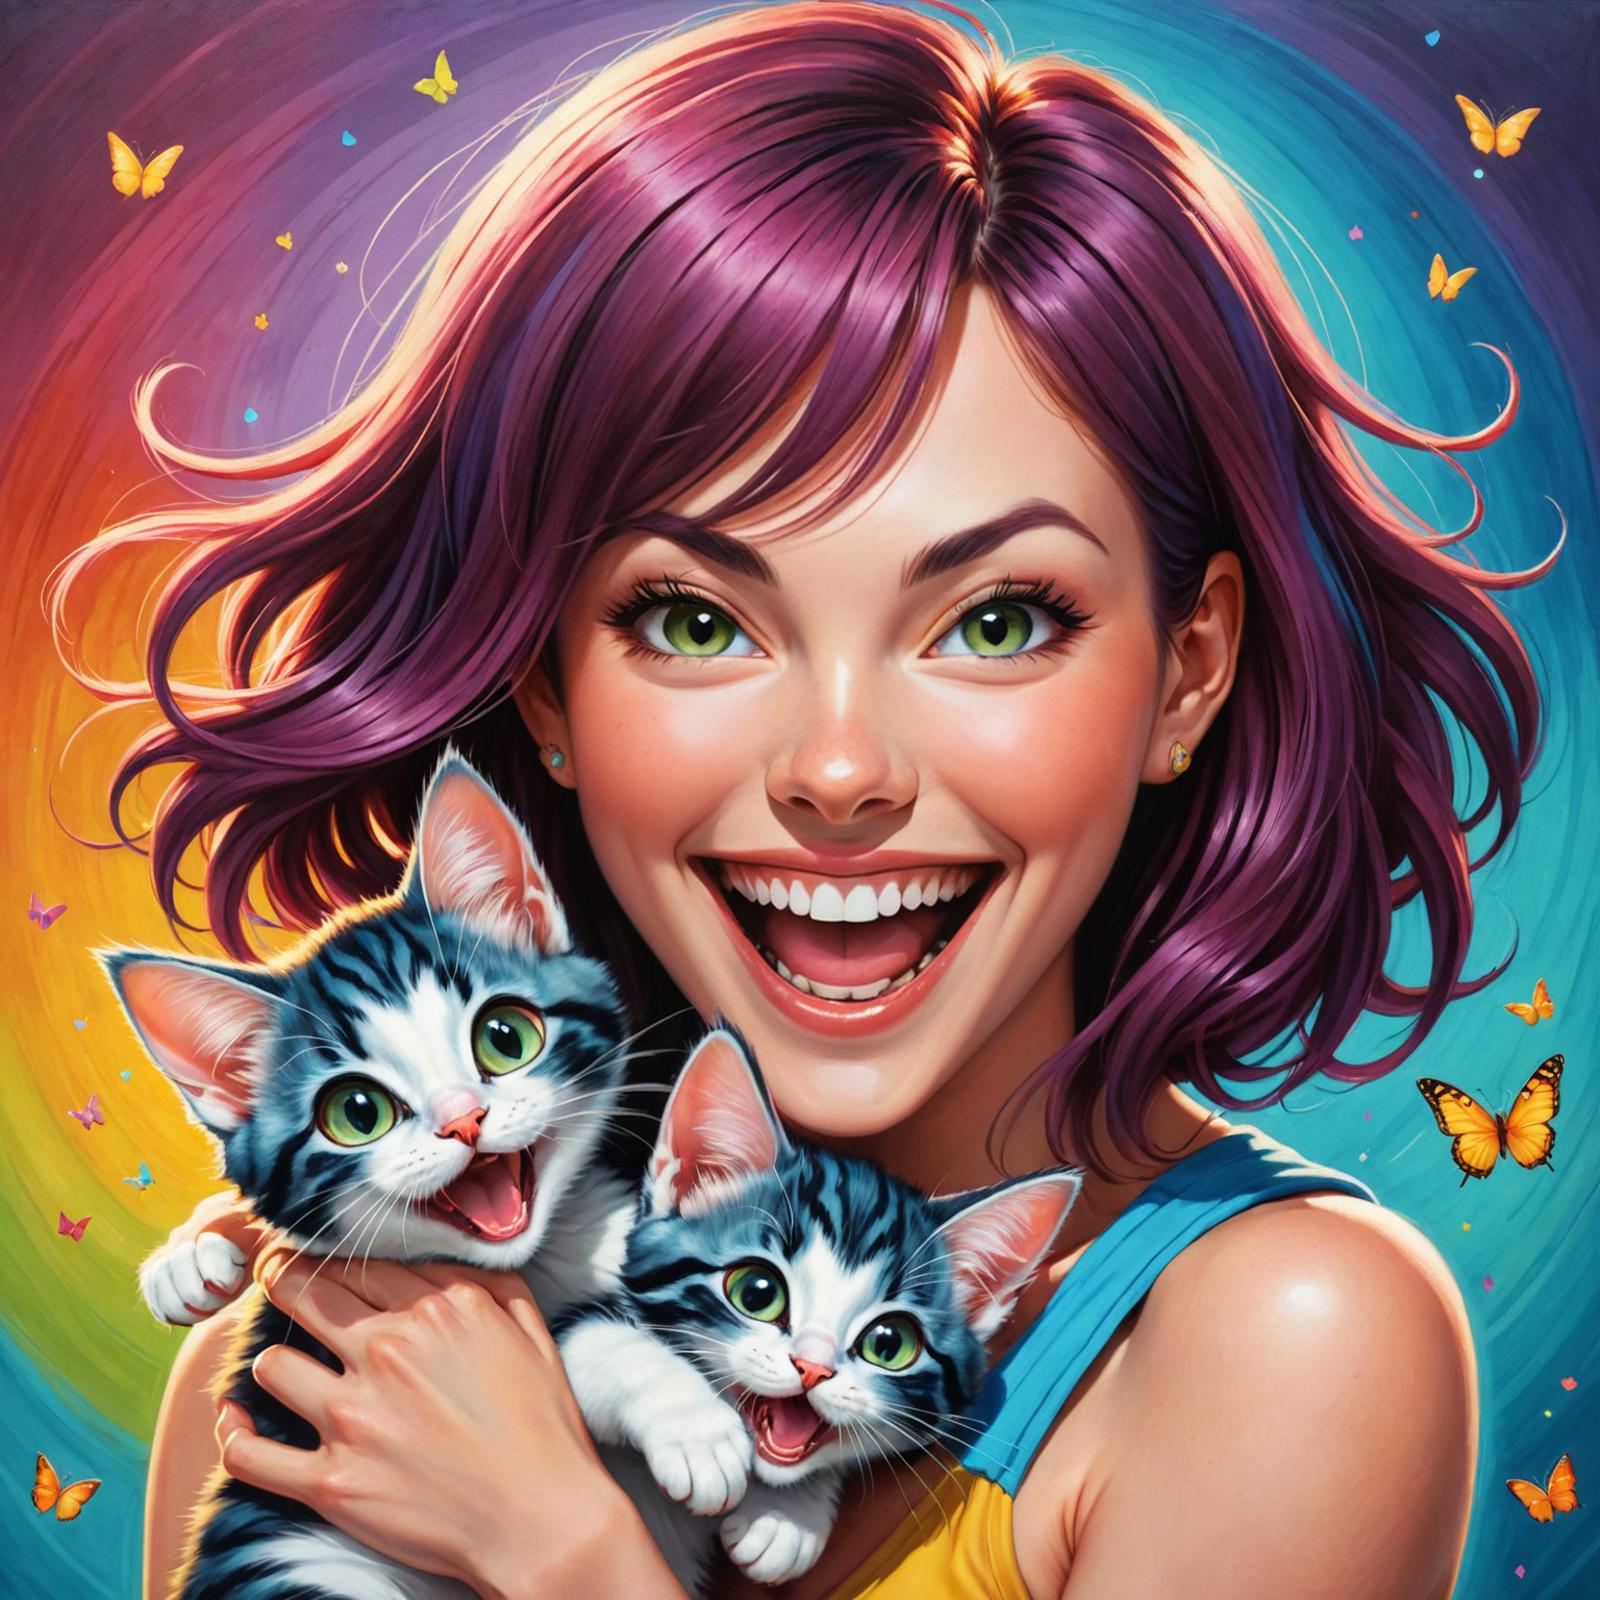 Colorful Illustration of a Woman Holding Two Kittens and Smiling